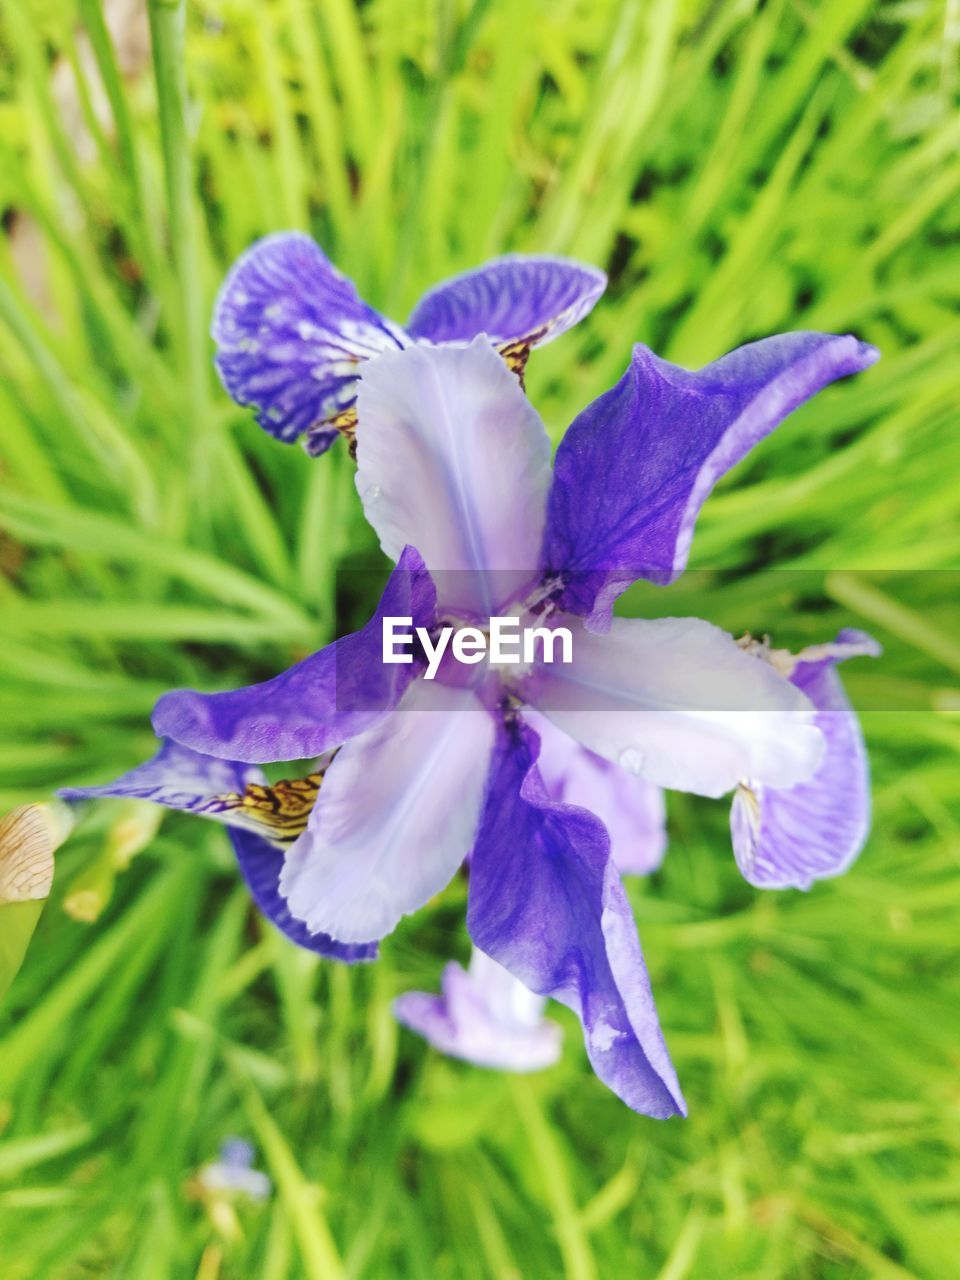 CLOSE-UP OF PURPLE IRIS FLOWER BLOOMING OUTDOORS